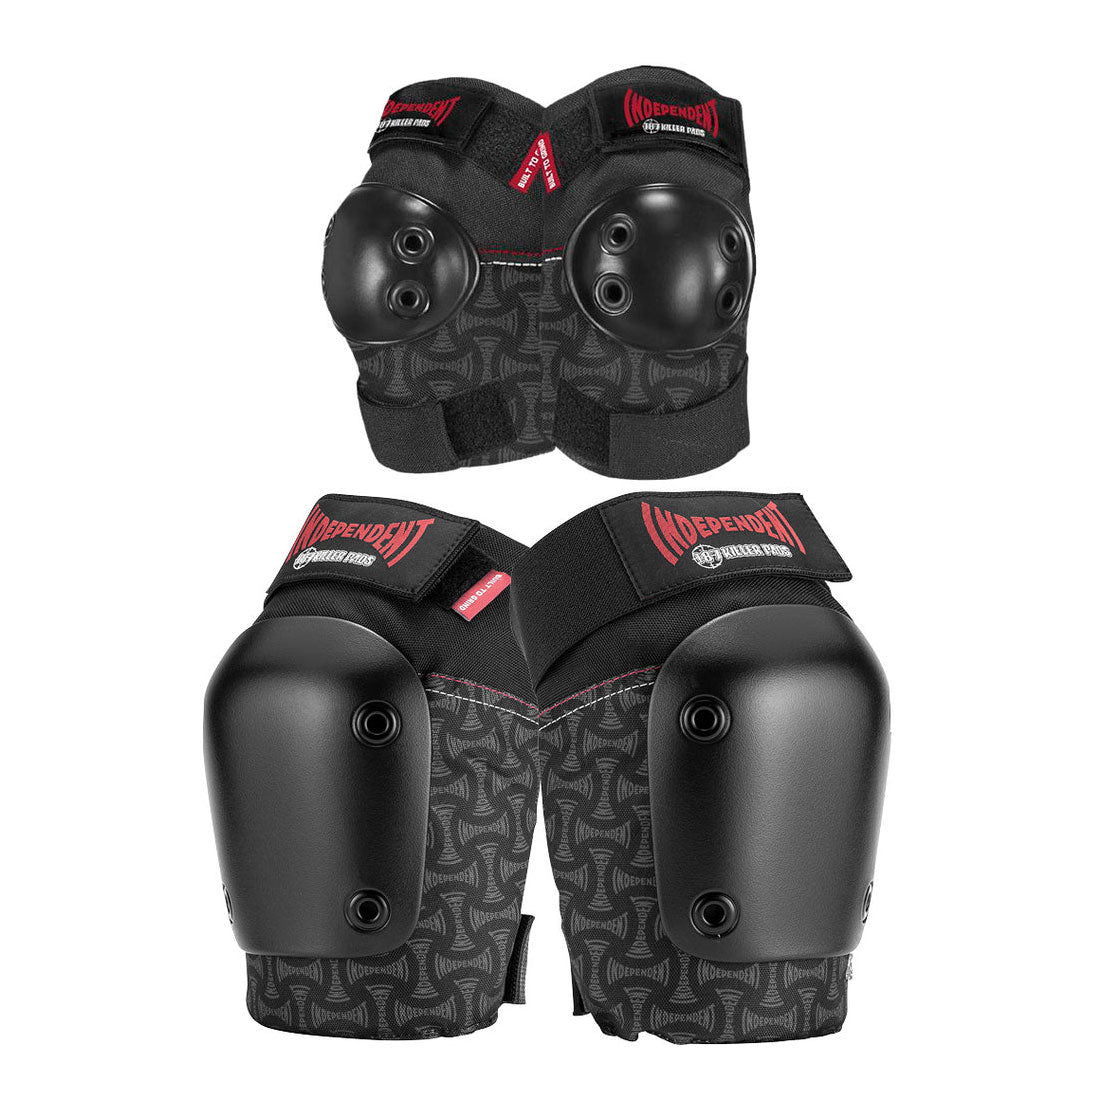 187 Knee/Elbow Combo Pack - Independent Black Protective Gear